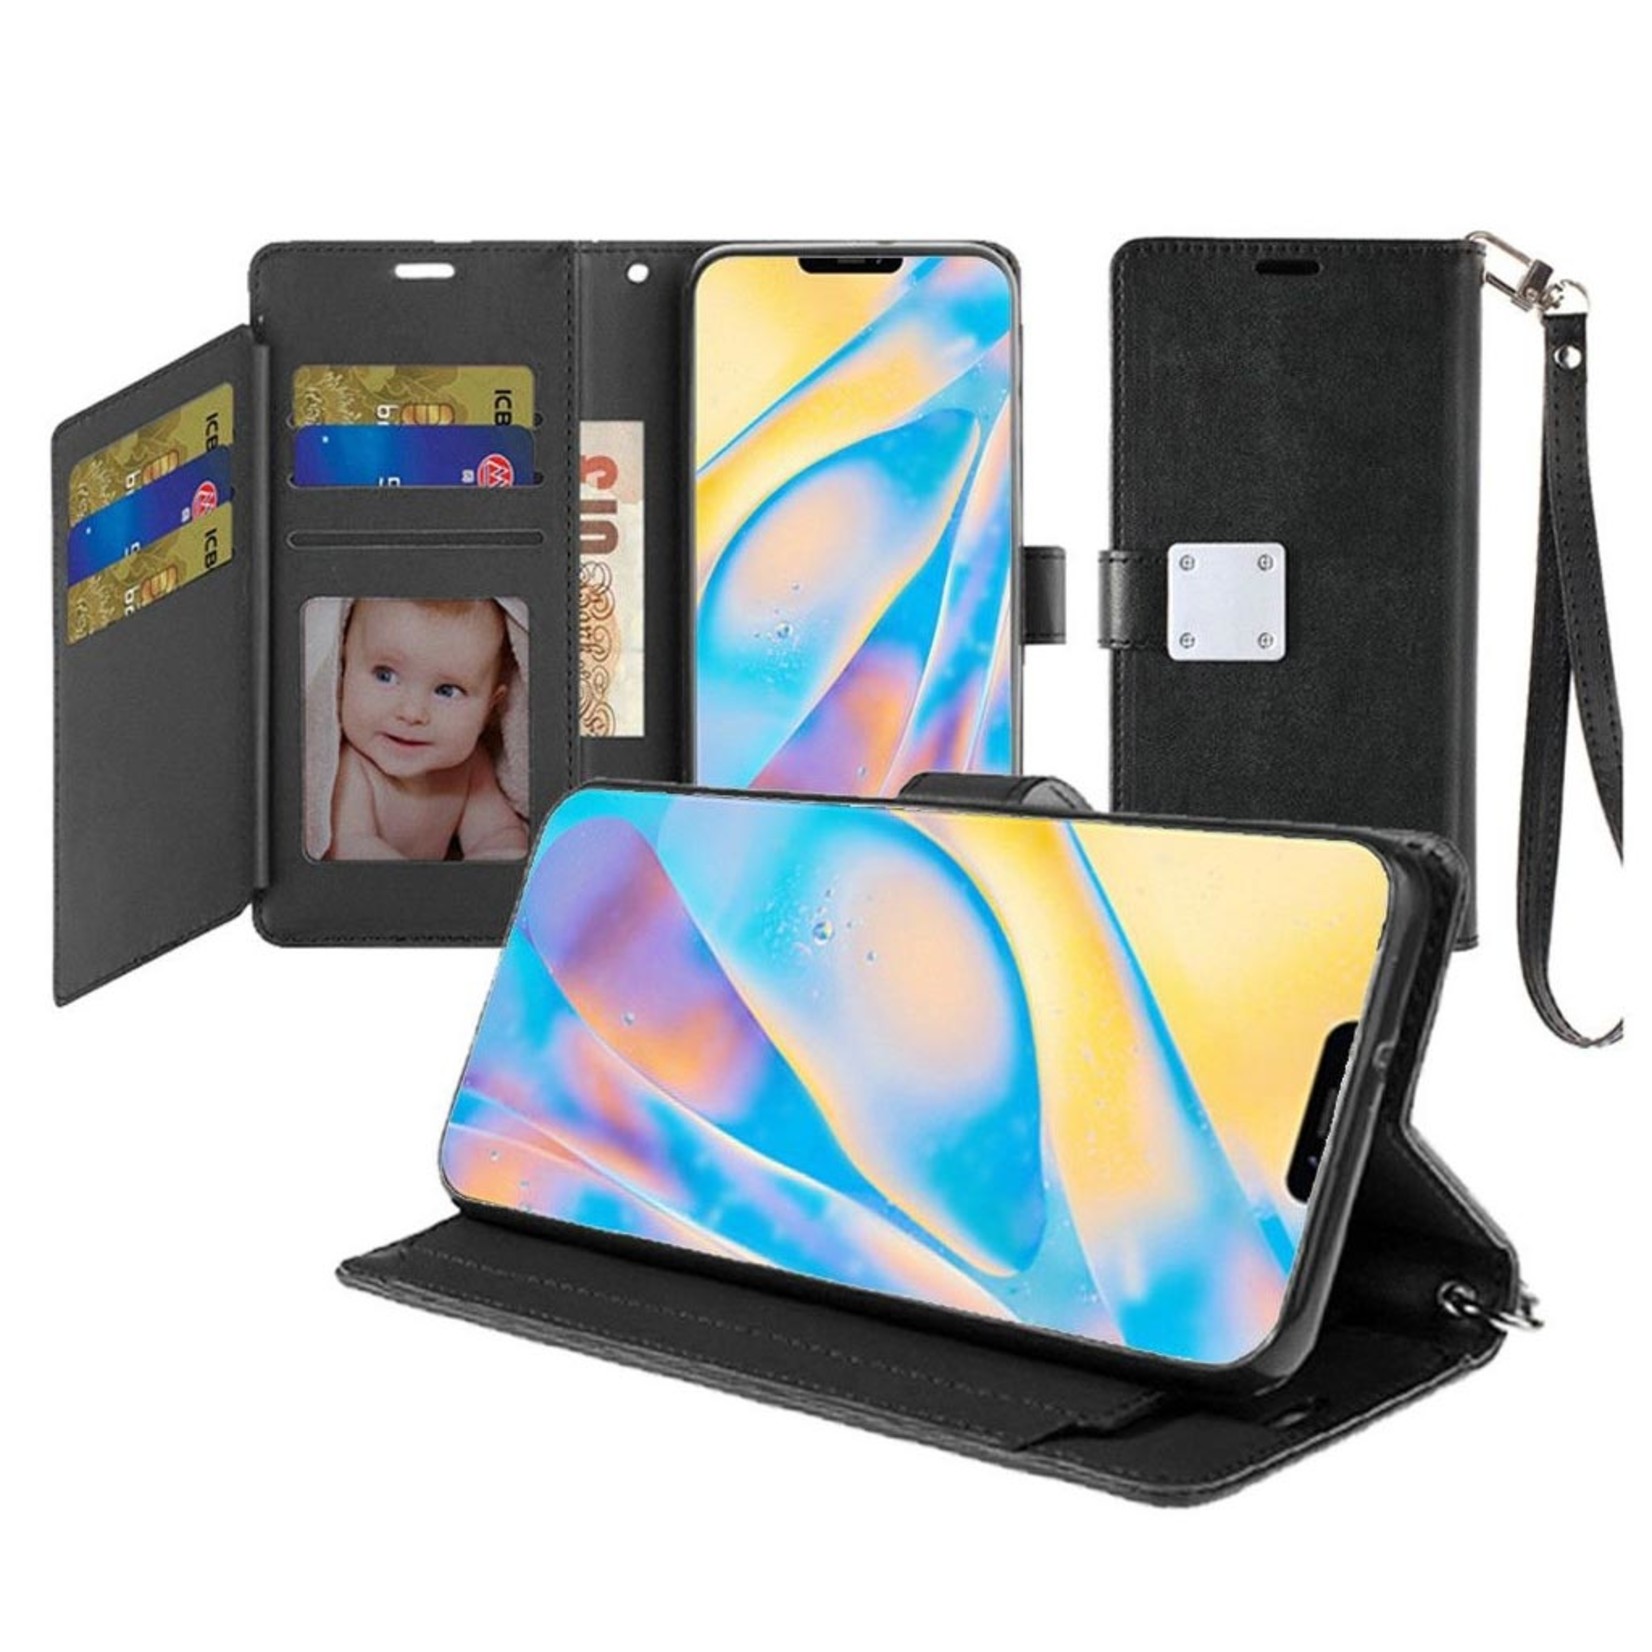 Hybrid PU Leather Metallic Flip Cover Wallet Case with Credit Card Slots for iPhone 12 Pro Max